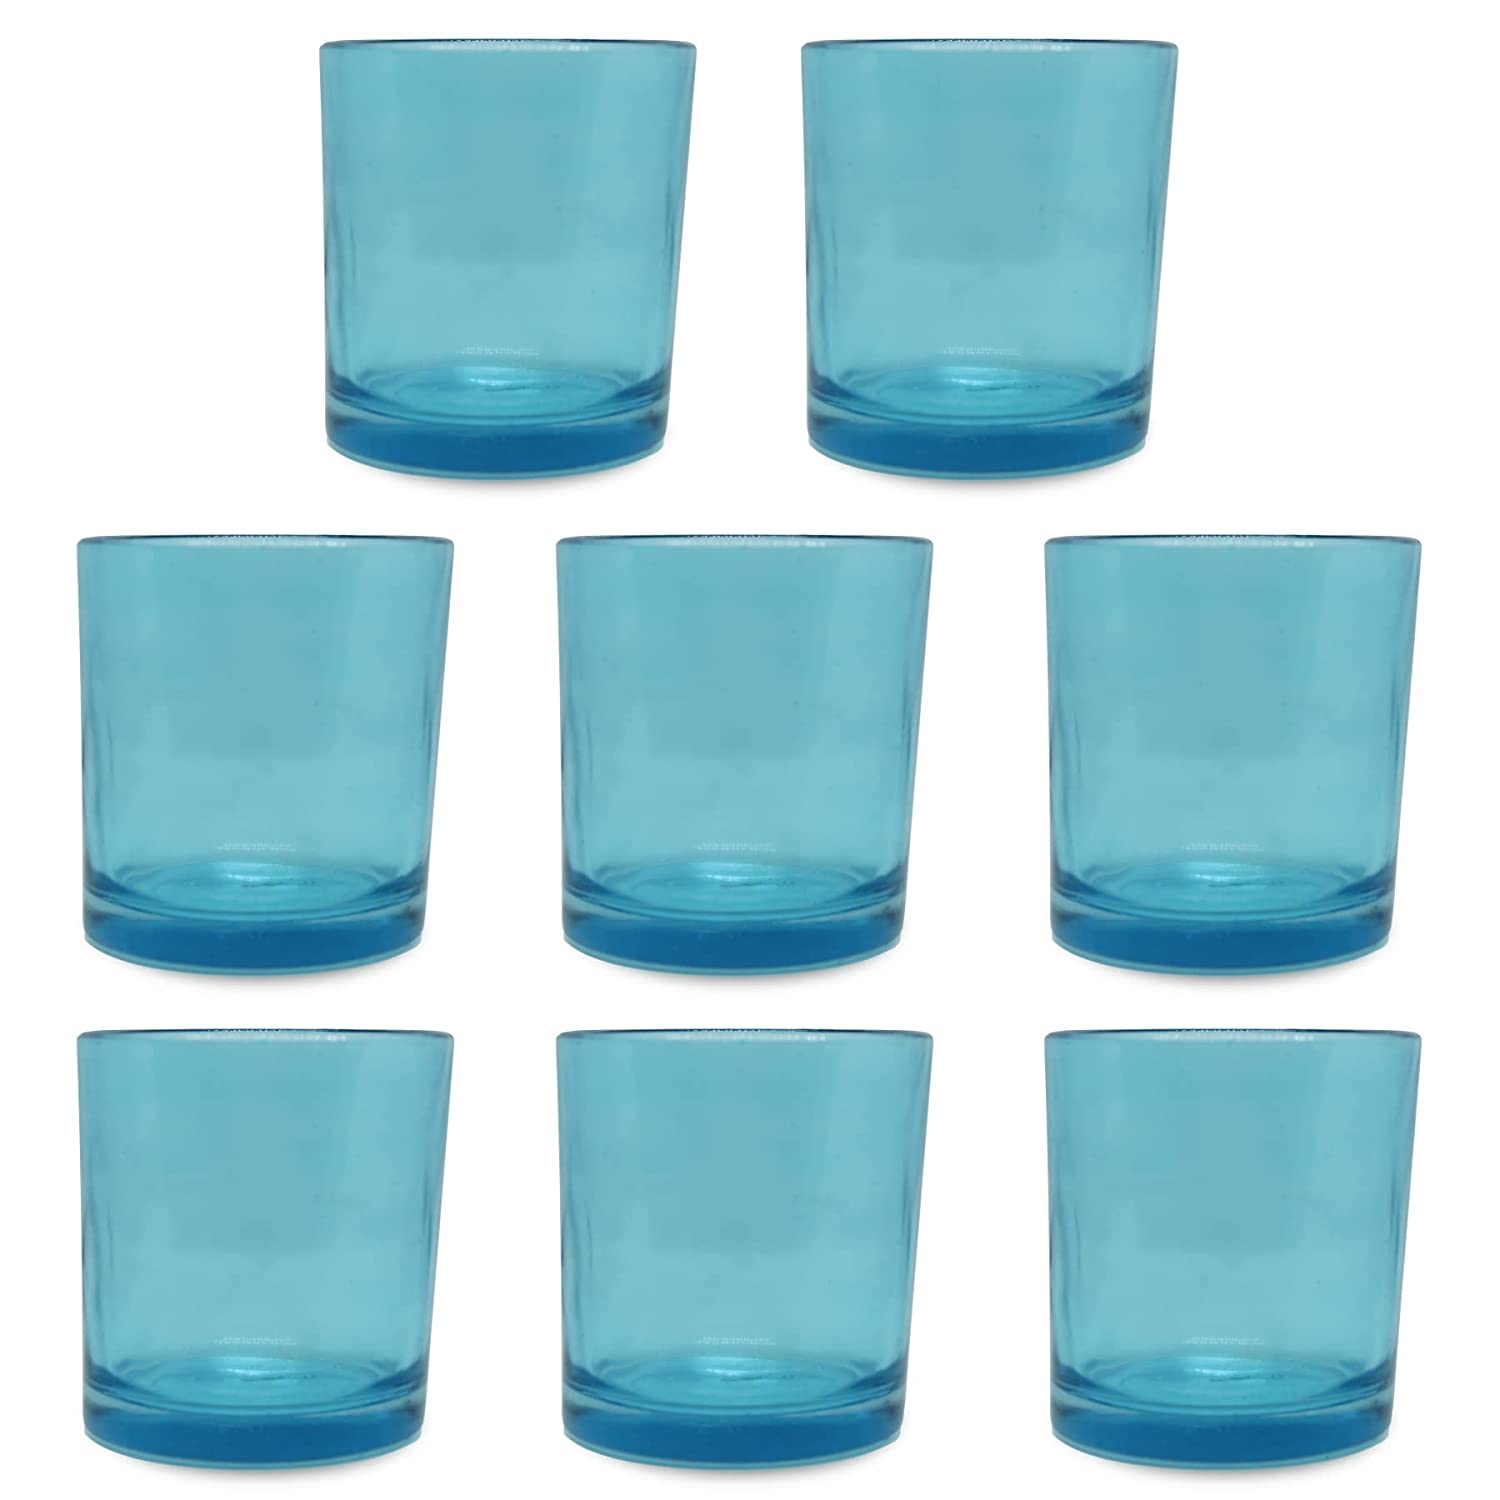 Shoprythm Packaging,Cosmetic Jar Pack of 8 Blue glass candle jar